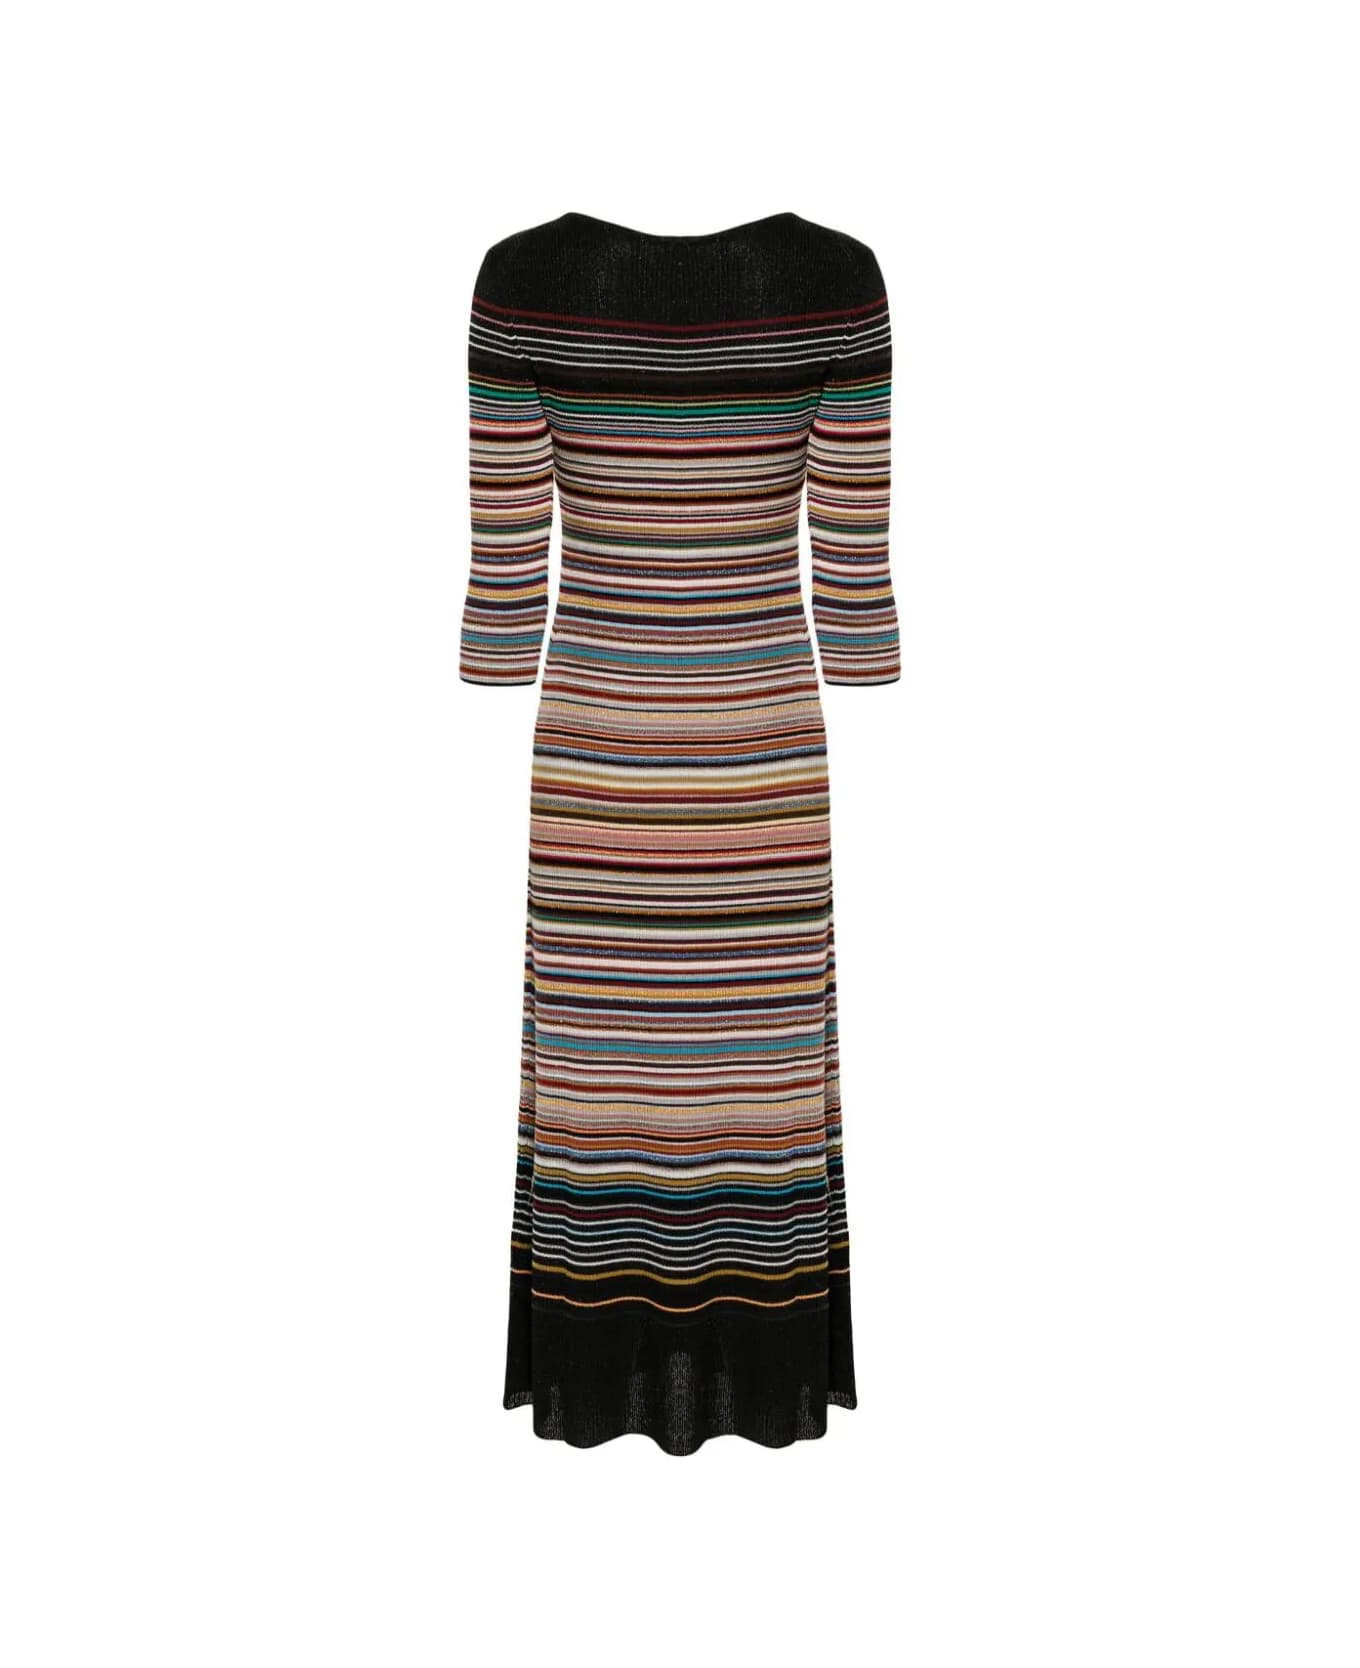 Paul Smith Knitted Dress - Multi